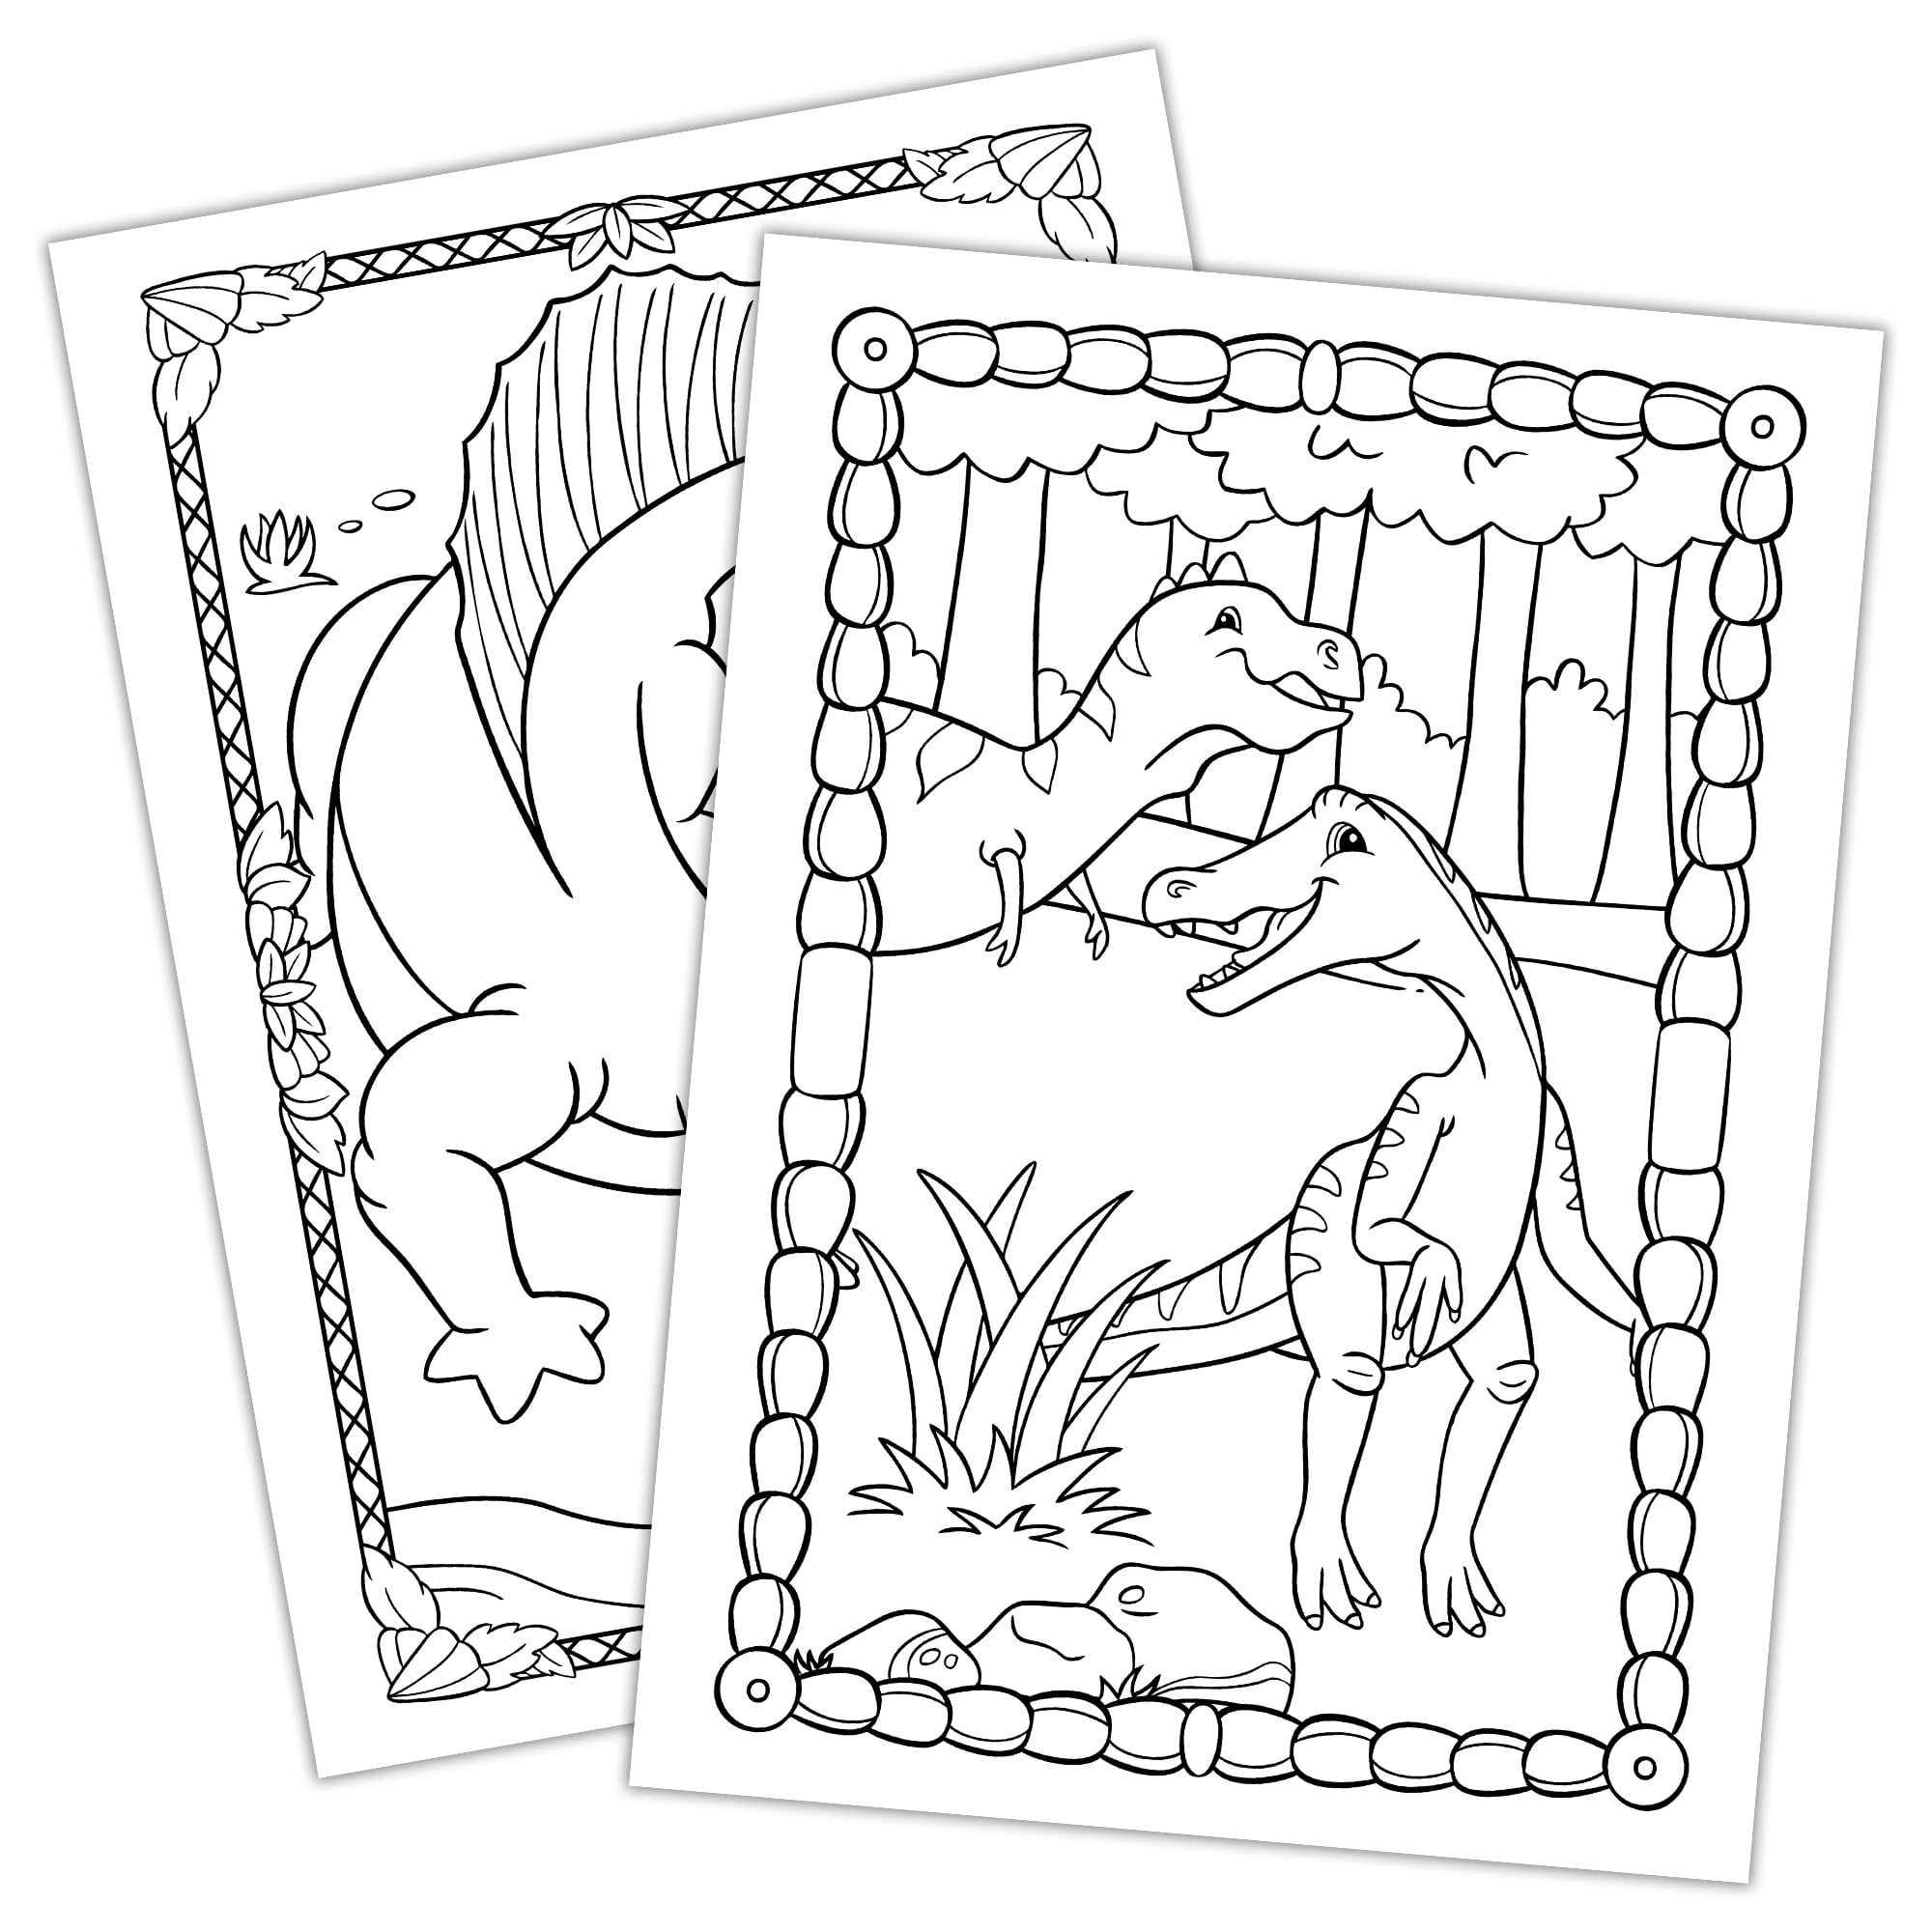 Coloring Book For Kids Ages 8-12, Original Dinosaurs Coloring pages  Inspired From Time Before Time Cartoon-Show, More +90 Coloring Pages.: A4  Size  Than 90 Coloring Pages In 182 Pages Book. by